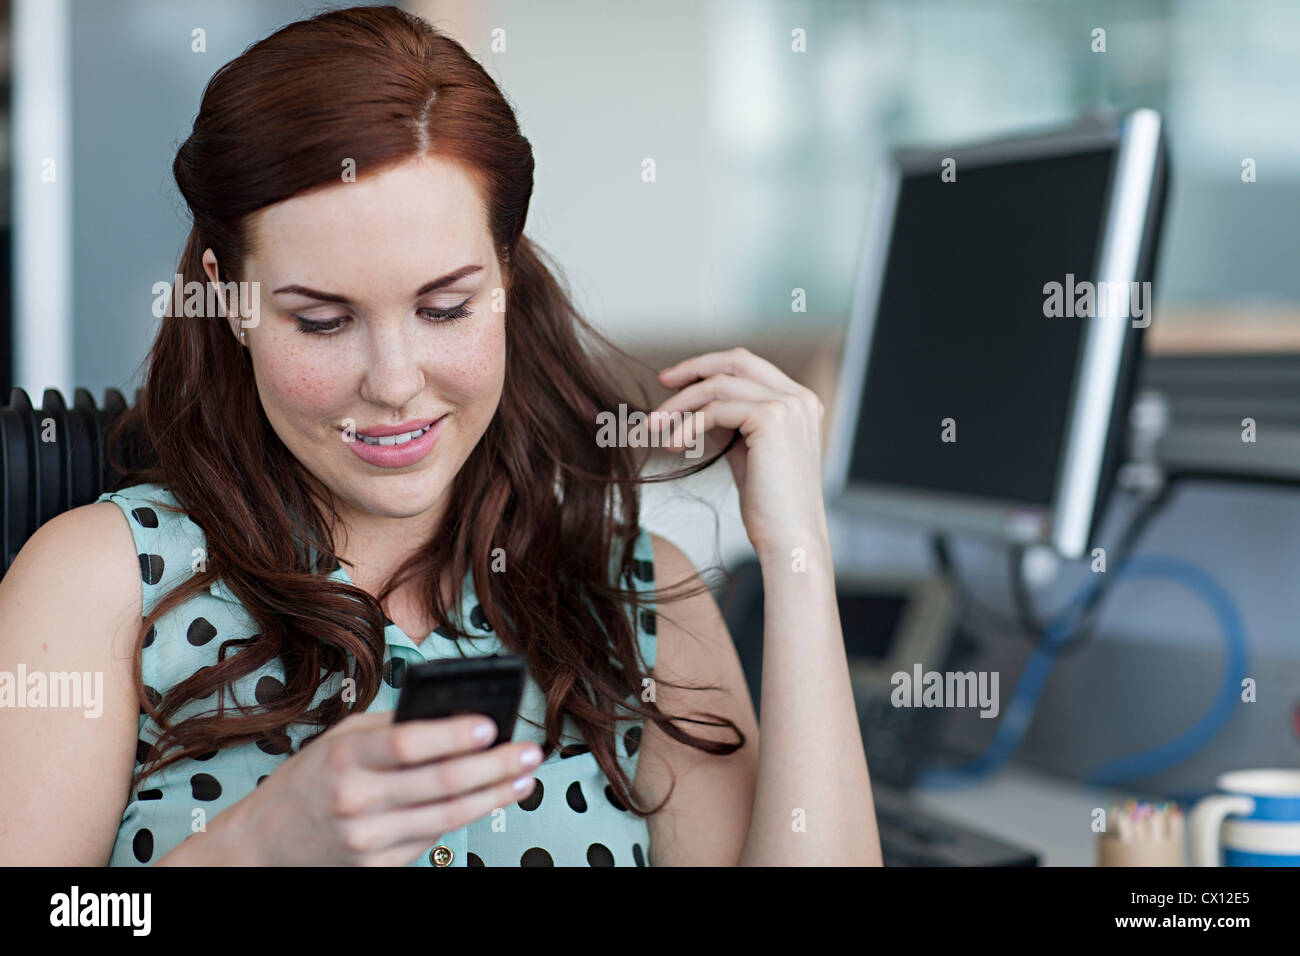 Woman texting on cell phone Stock Photo